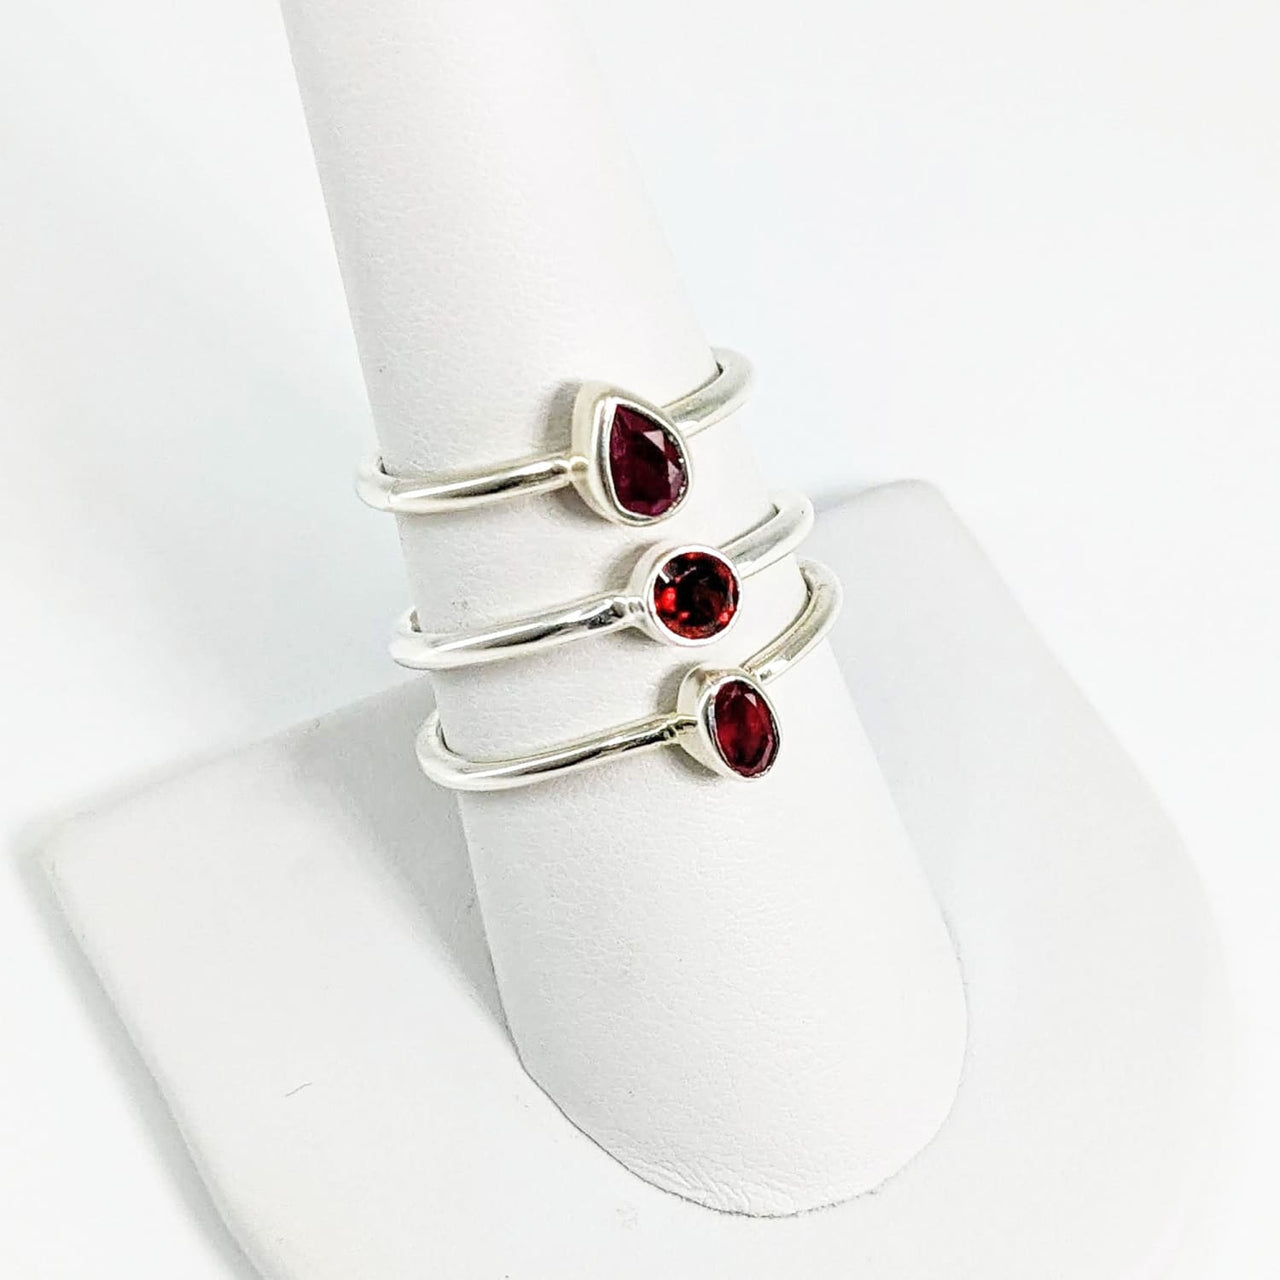 1 Ruby Faceted Dainty Ring Stackable Sterling Silver Ring 